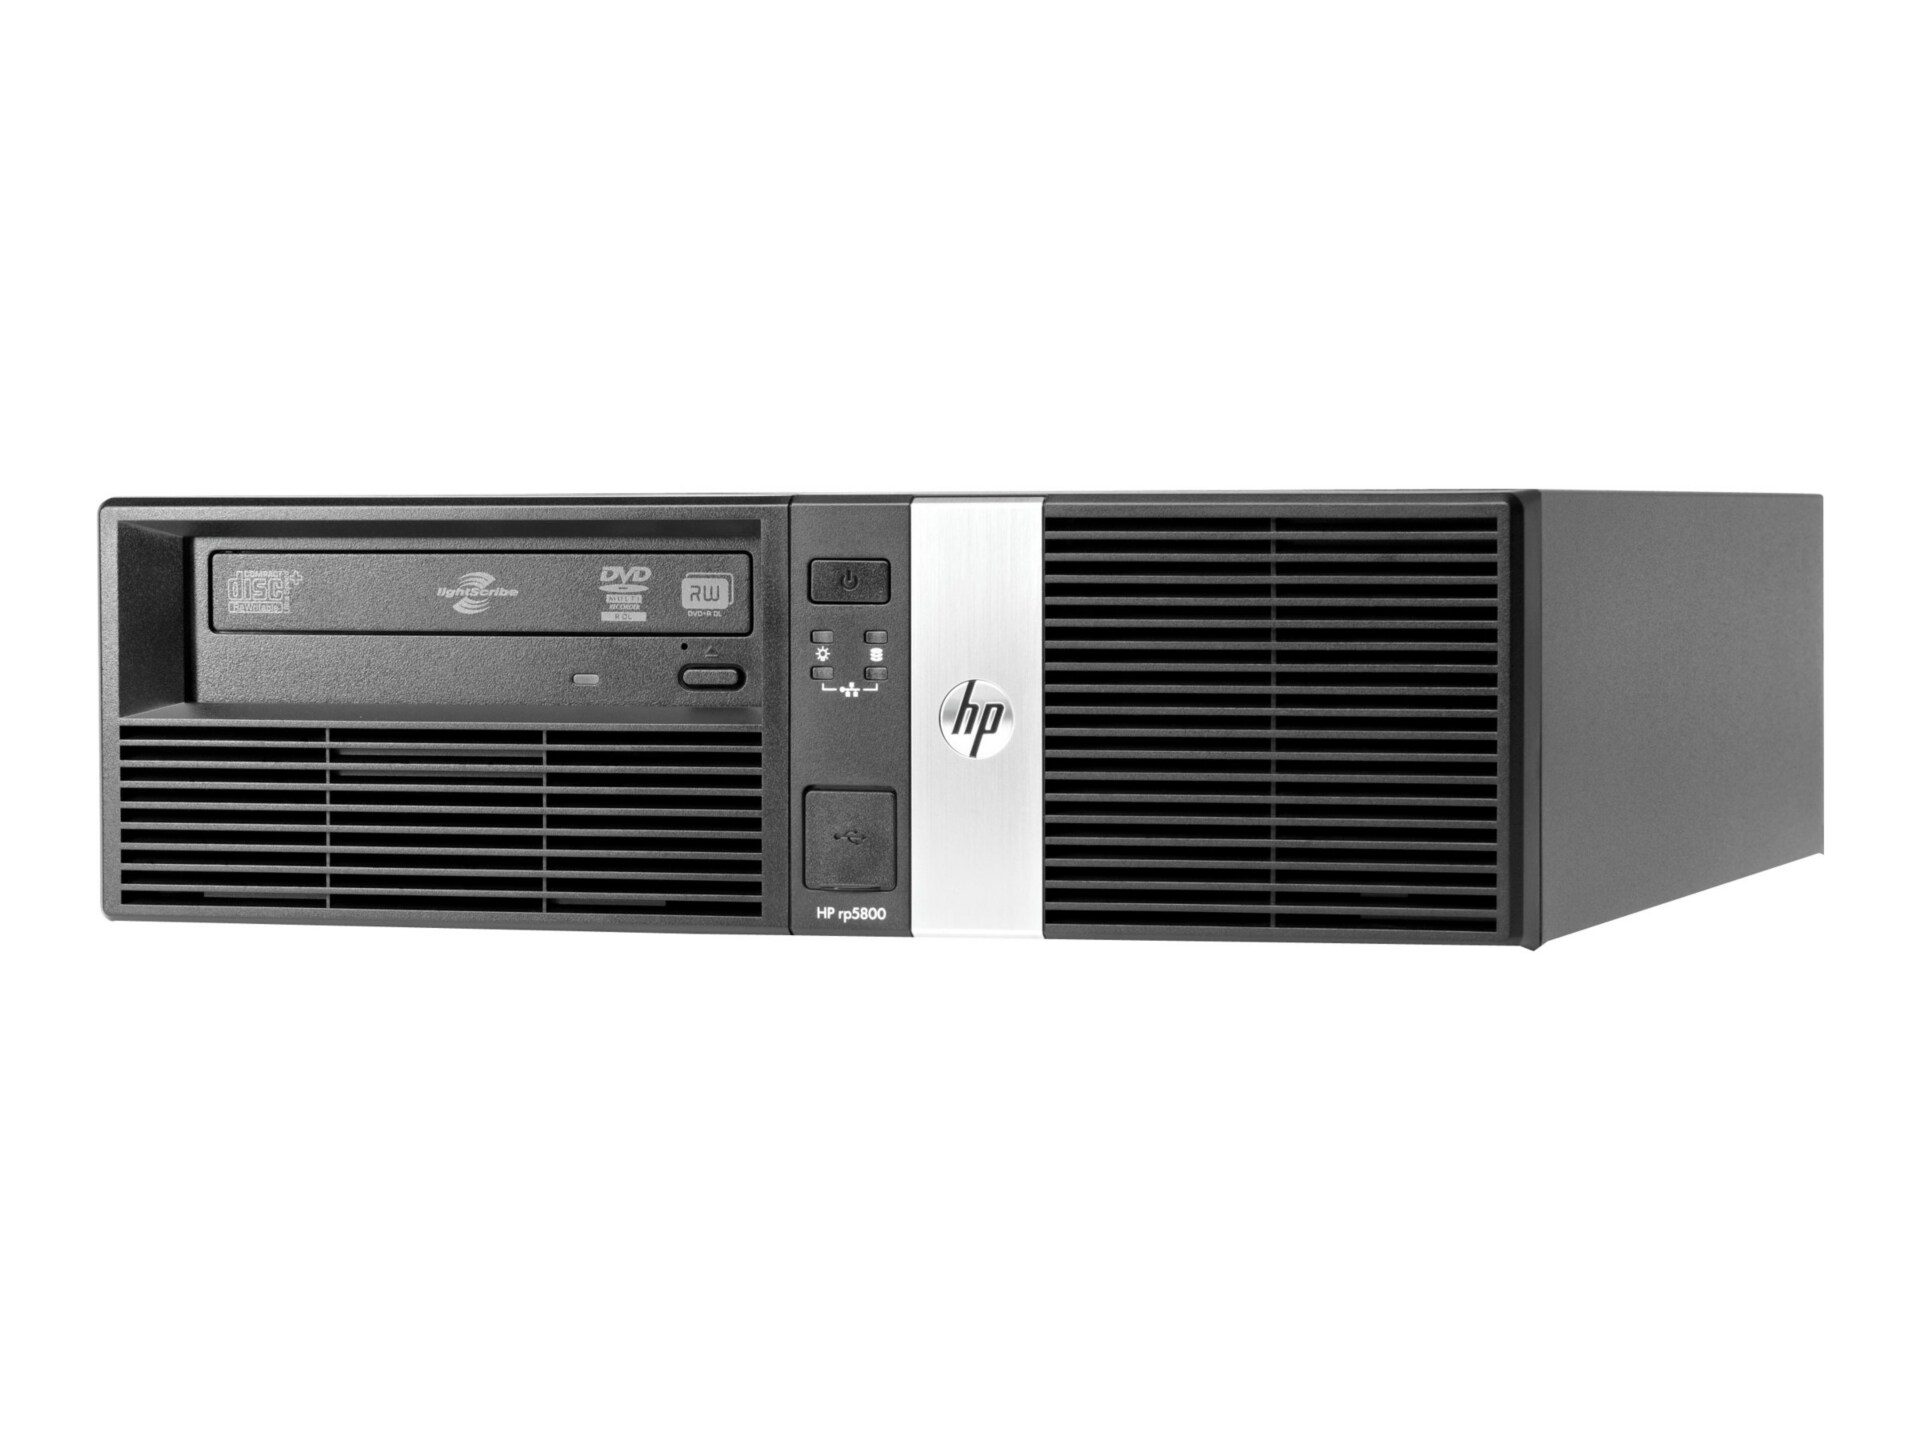 HP Point of Sale System rp5800 - DT - Core i3 2120 3.3 GHz - 2 GB - 500 GB